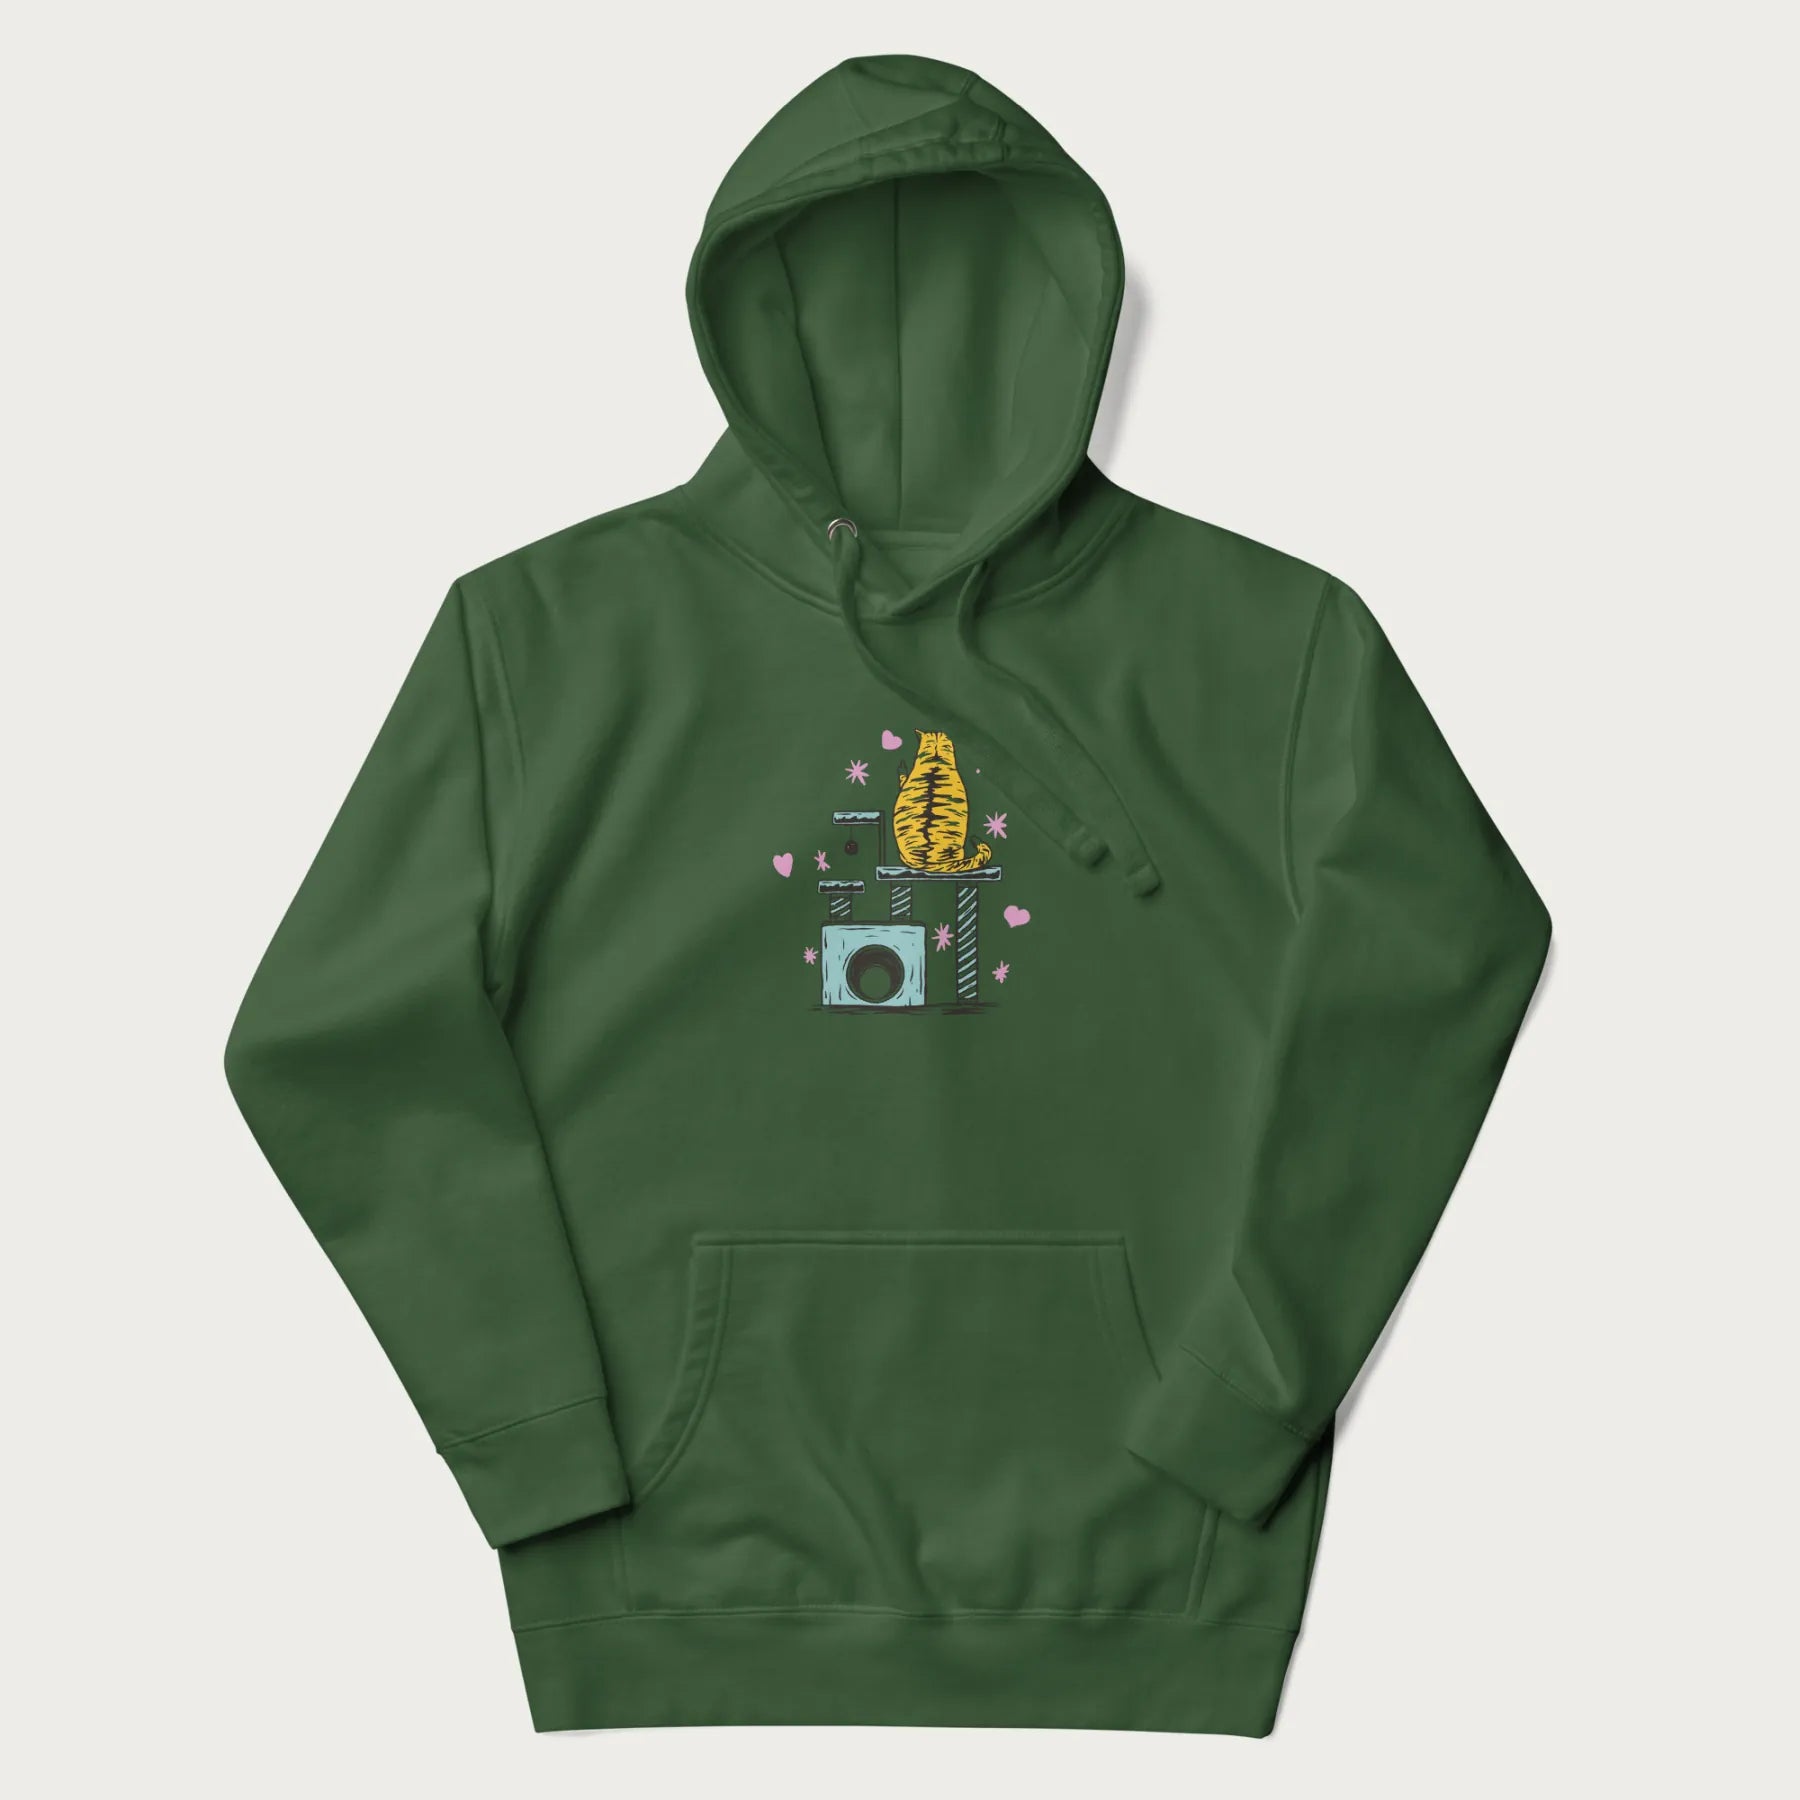 Forest green hoodie with graphic of a tabby cat on a scratching post, raising its middle finger.